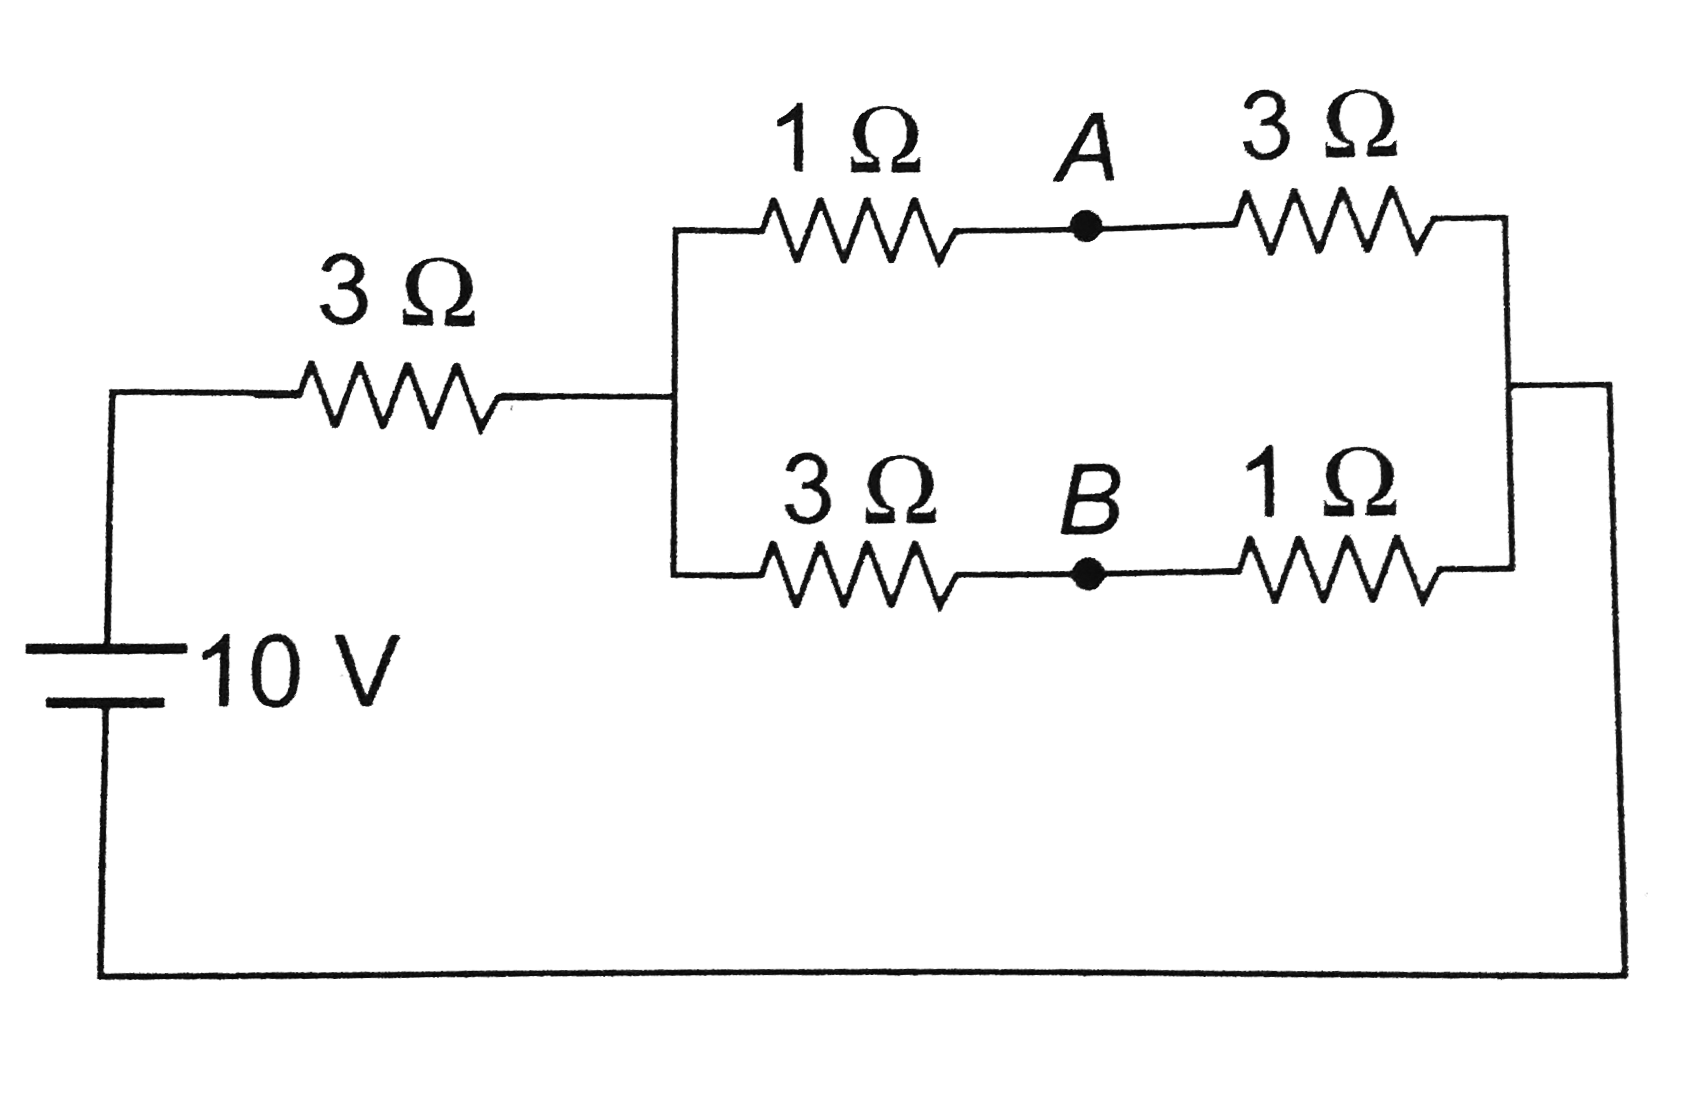 A battery of e.m.f. 10 V is connected to resistance as shown in figure. The potential difference V(A) - V(B) between the point A and B is